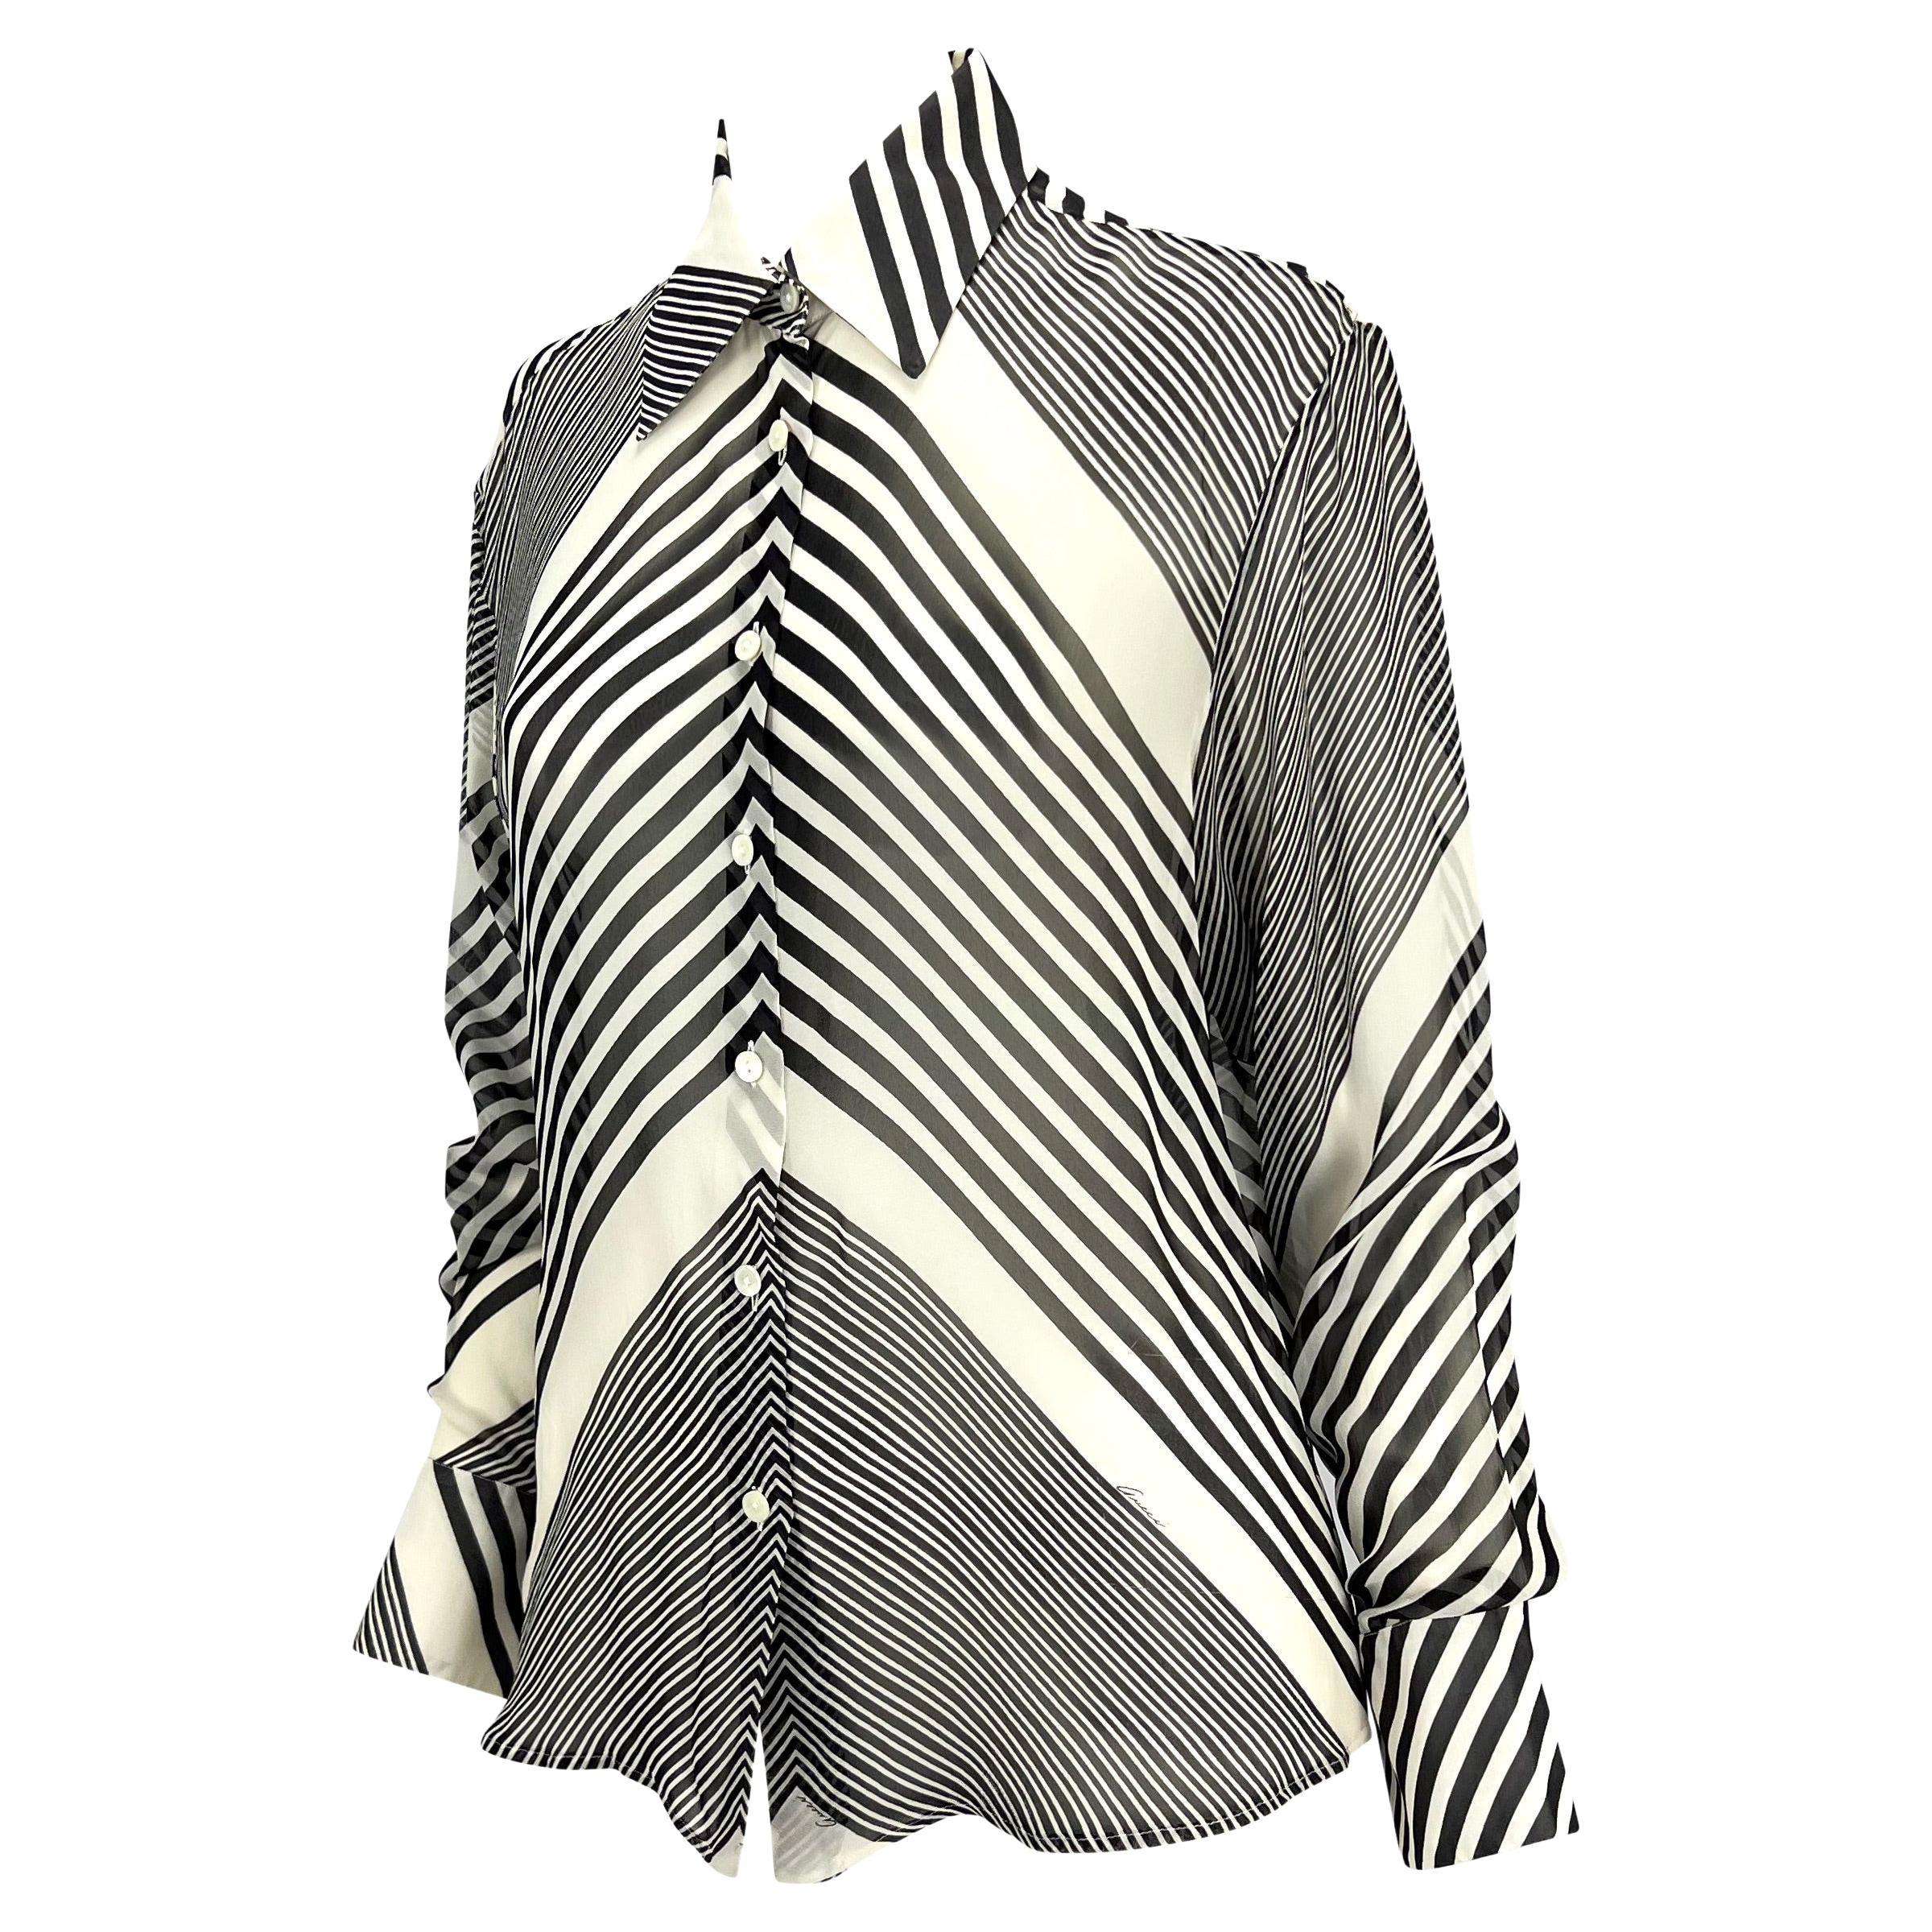 Cruise 2000 Gucci by Tom Ford Black White Stripe Sheer Button Up Top In Good Condition For Sale In West Hollywood, CA